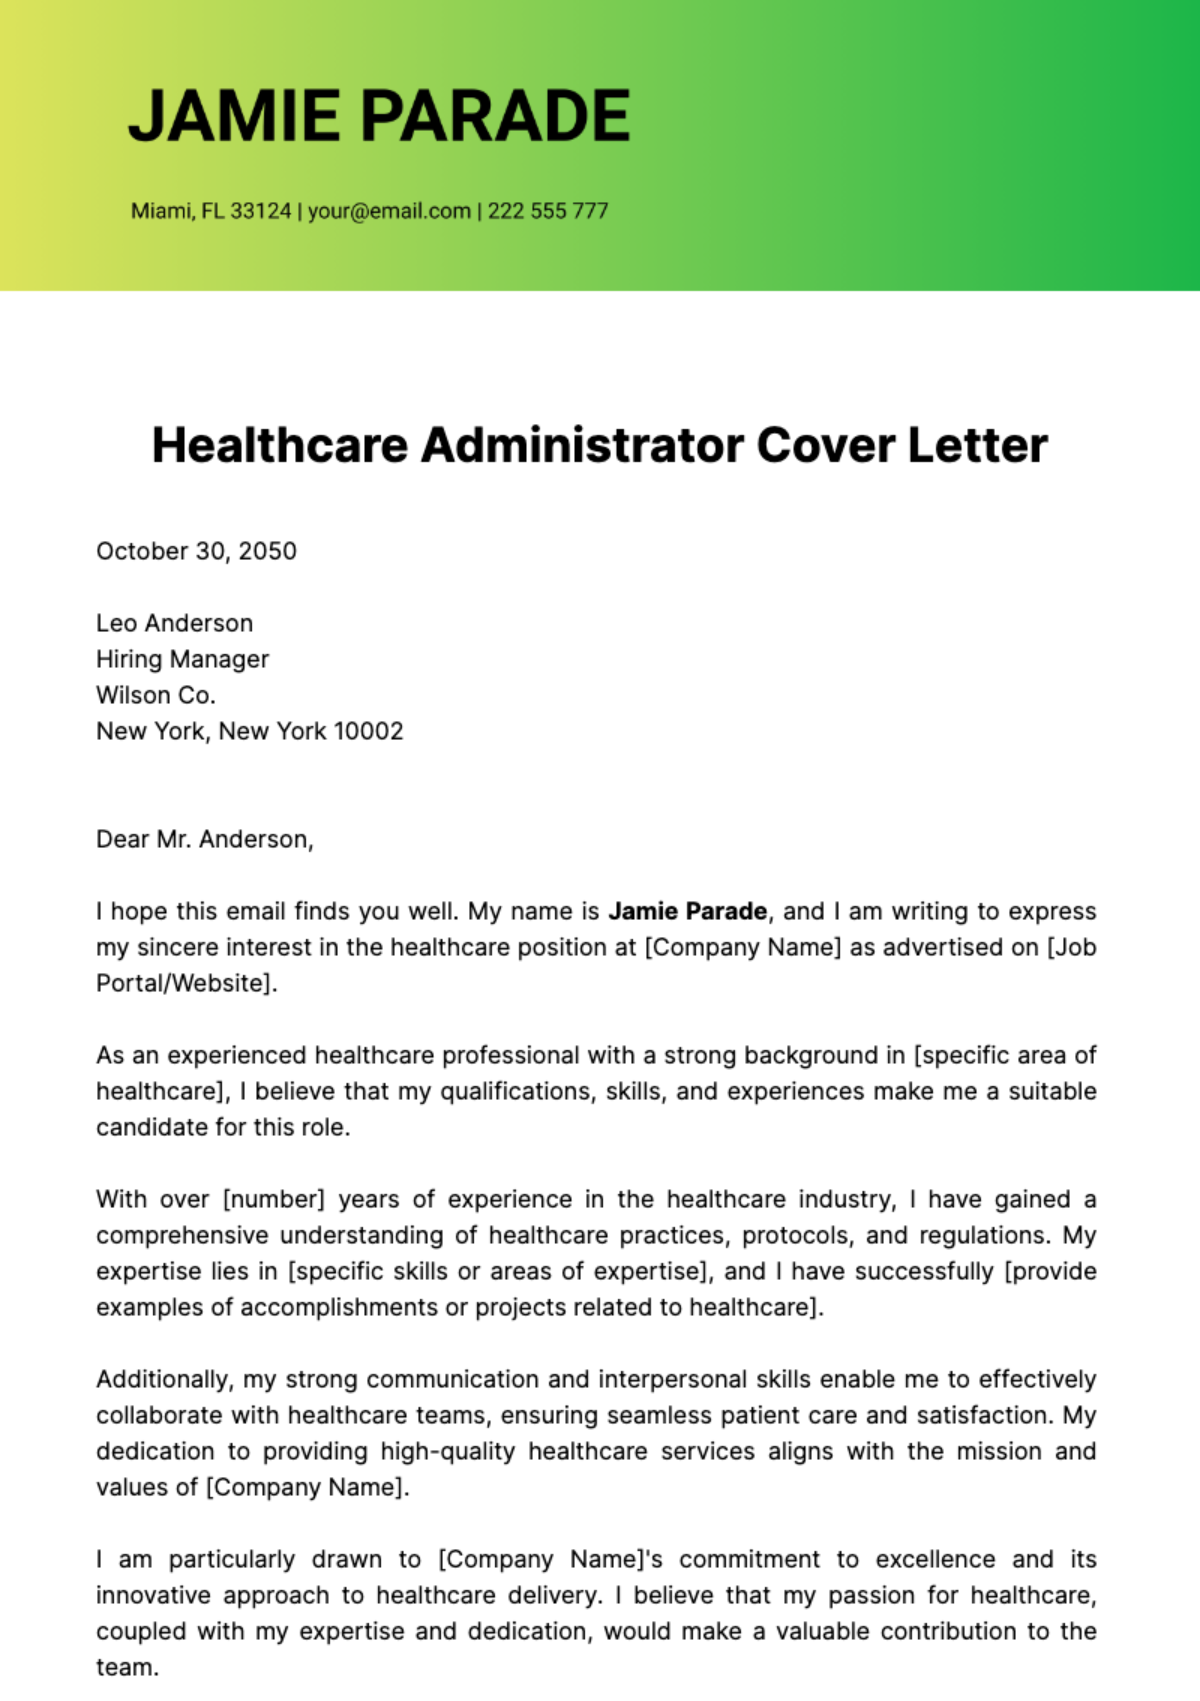 Healthcare Administrator Cover Letter  Template